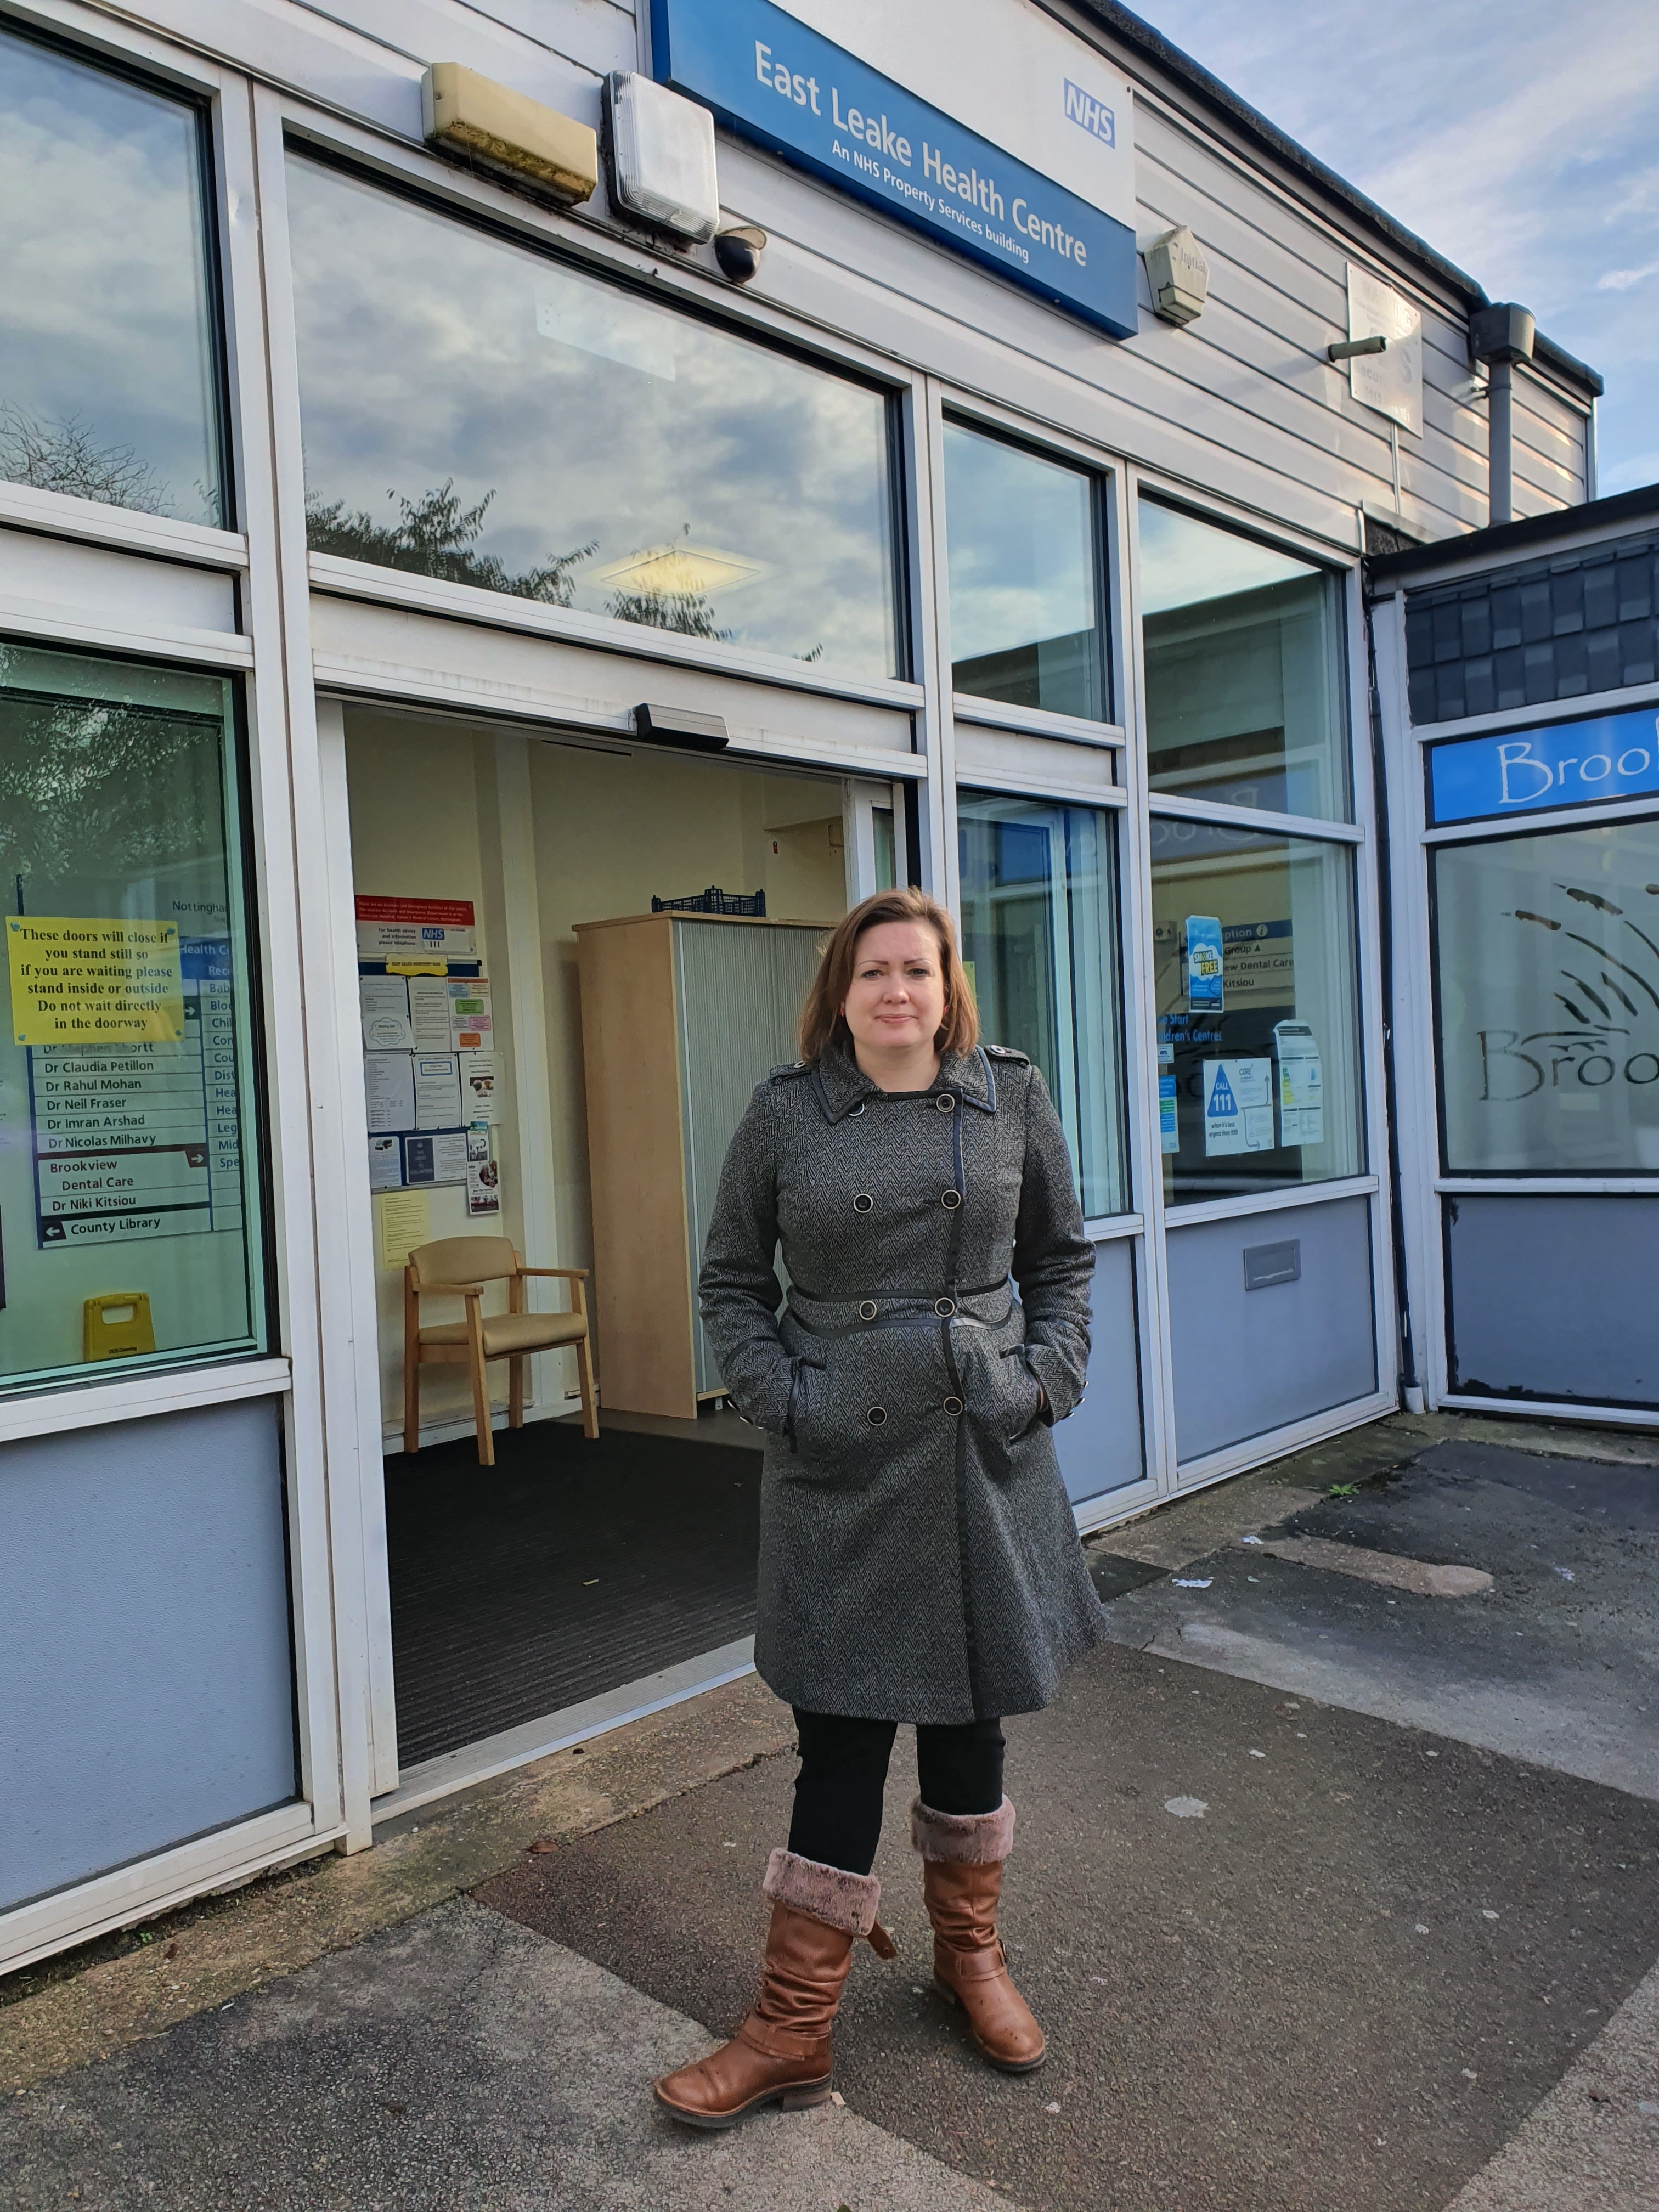 Ruth in front of East Leake Health Centre